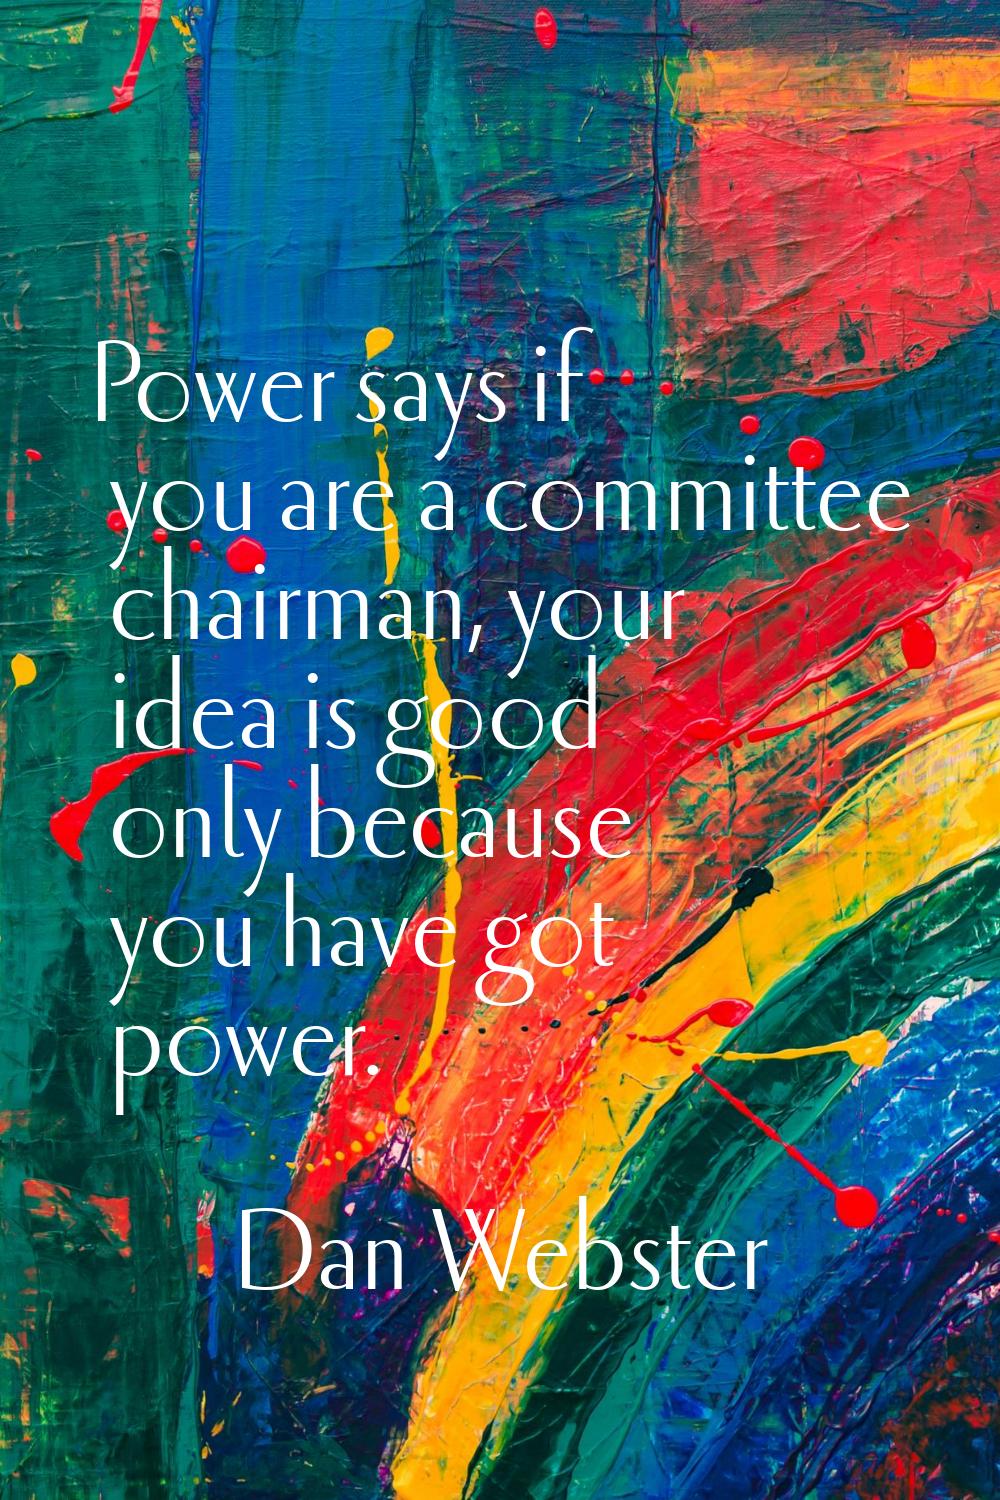 Power says if you are a committee chairman, your idea is good only because you have got power.